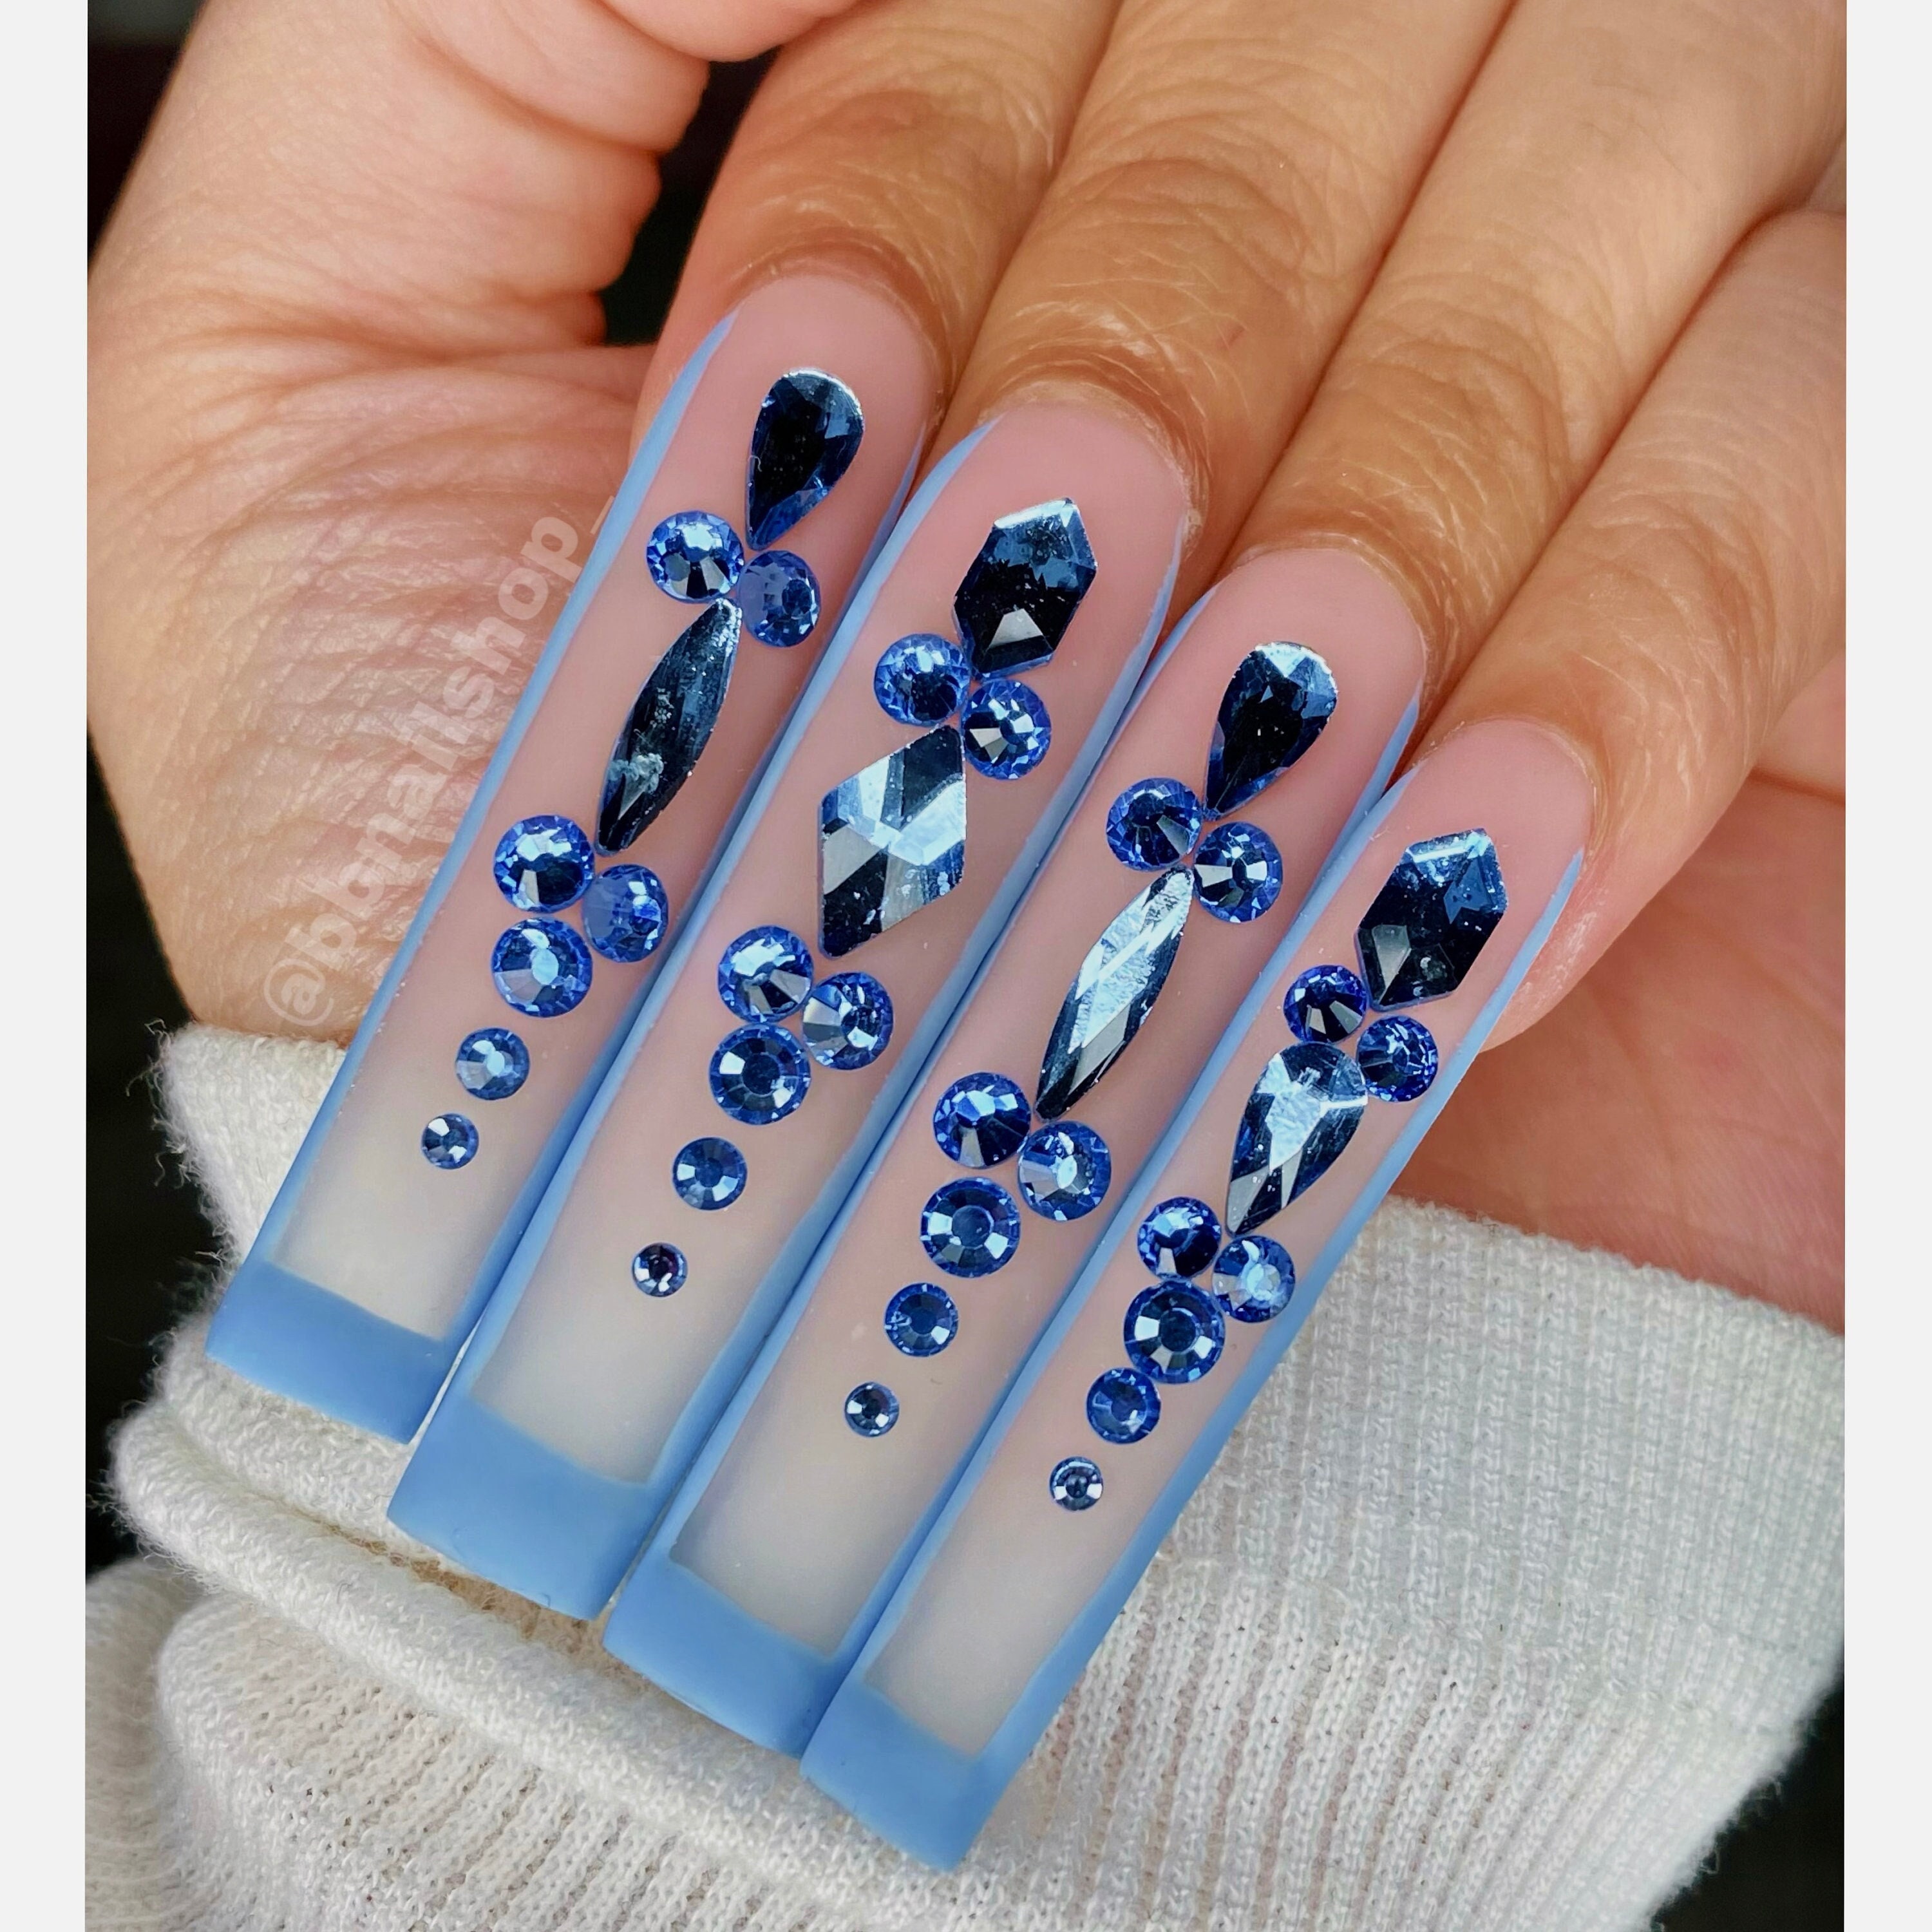 LV Nails - XL Long with nail design 💋 Ombré nude and blue